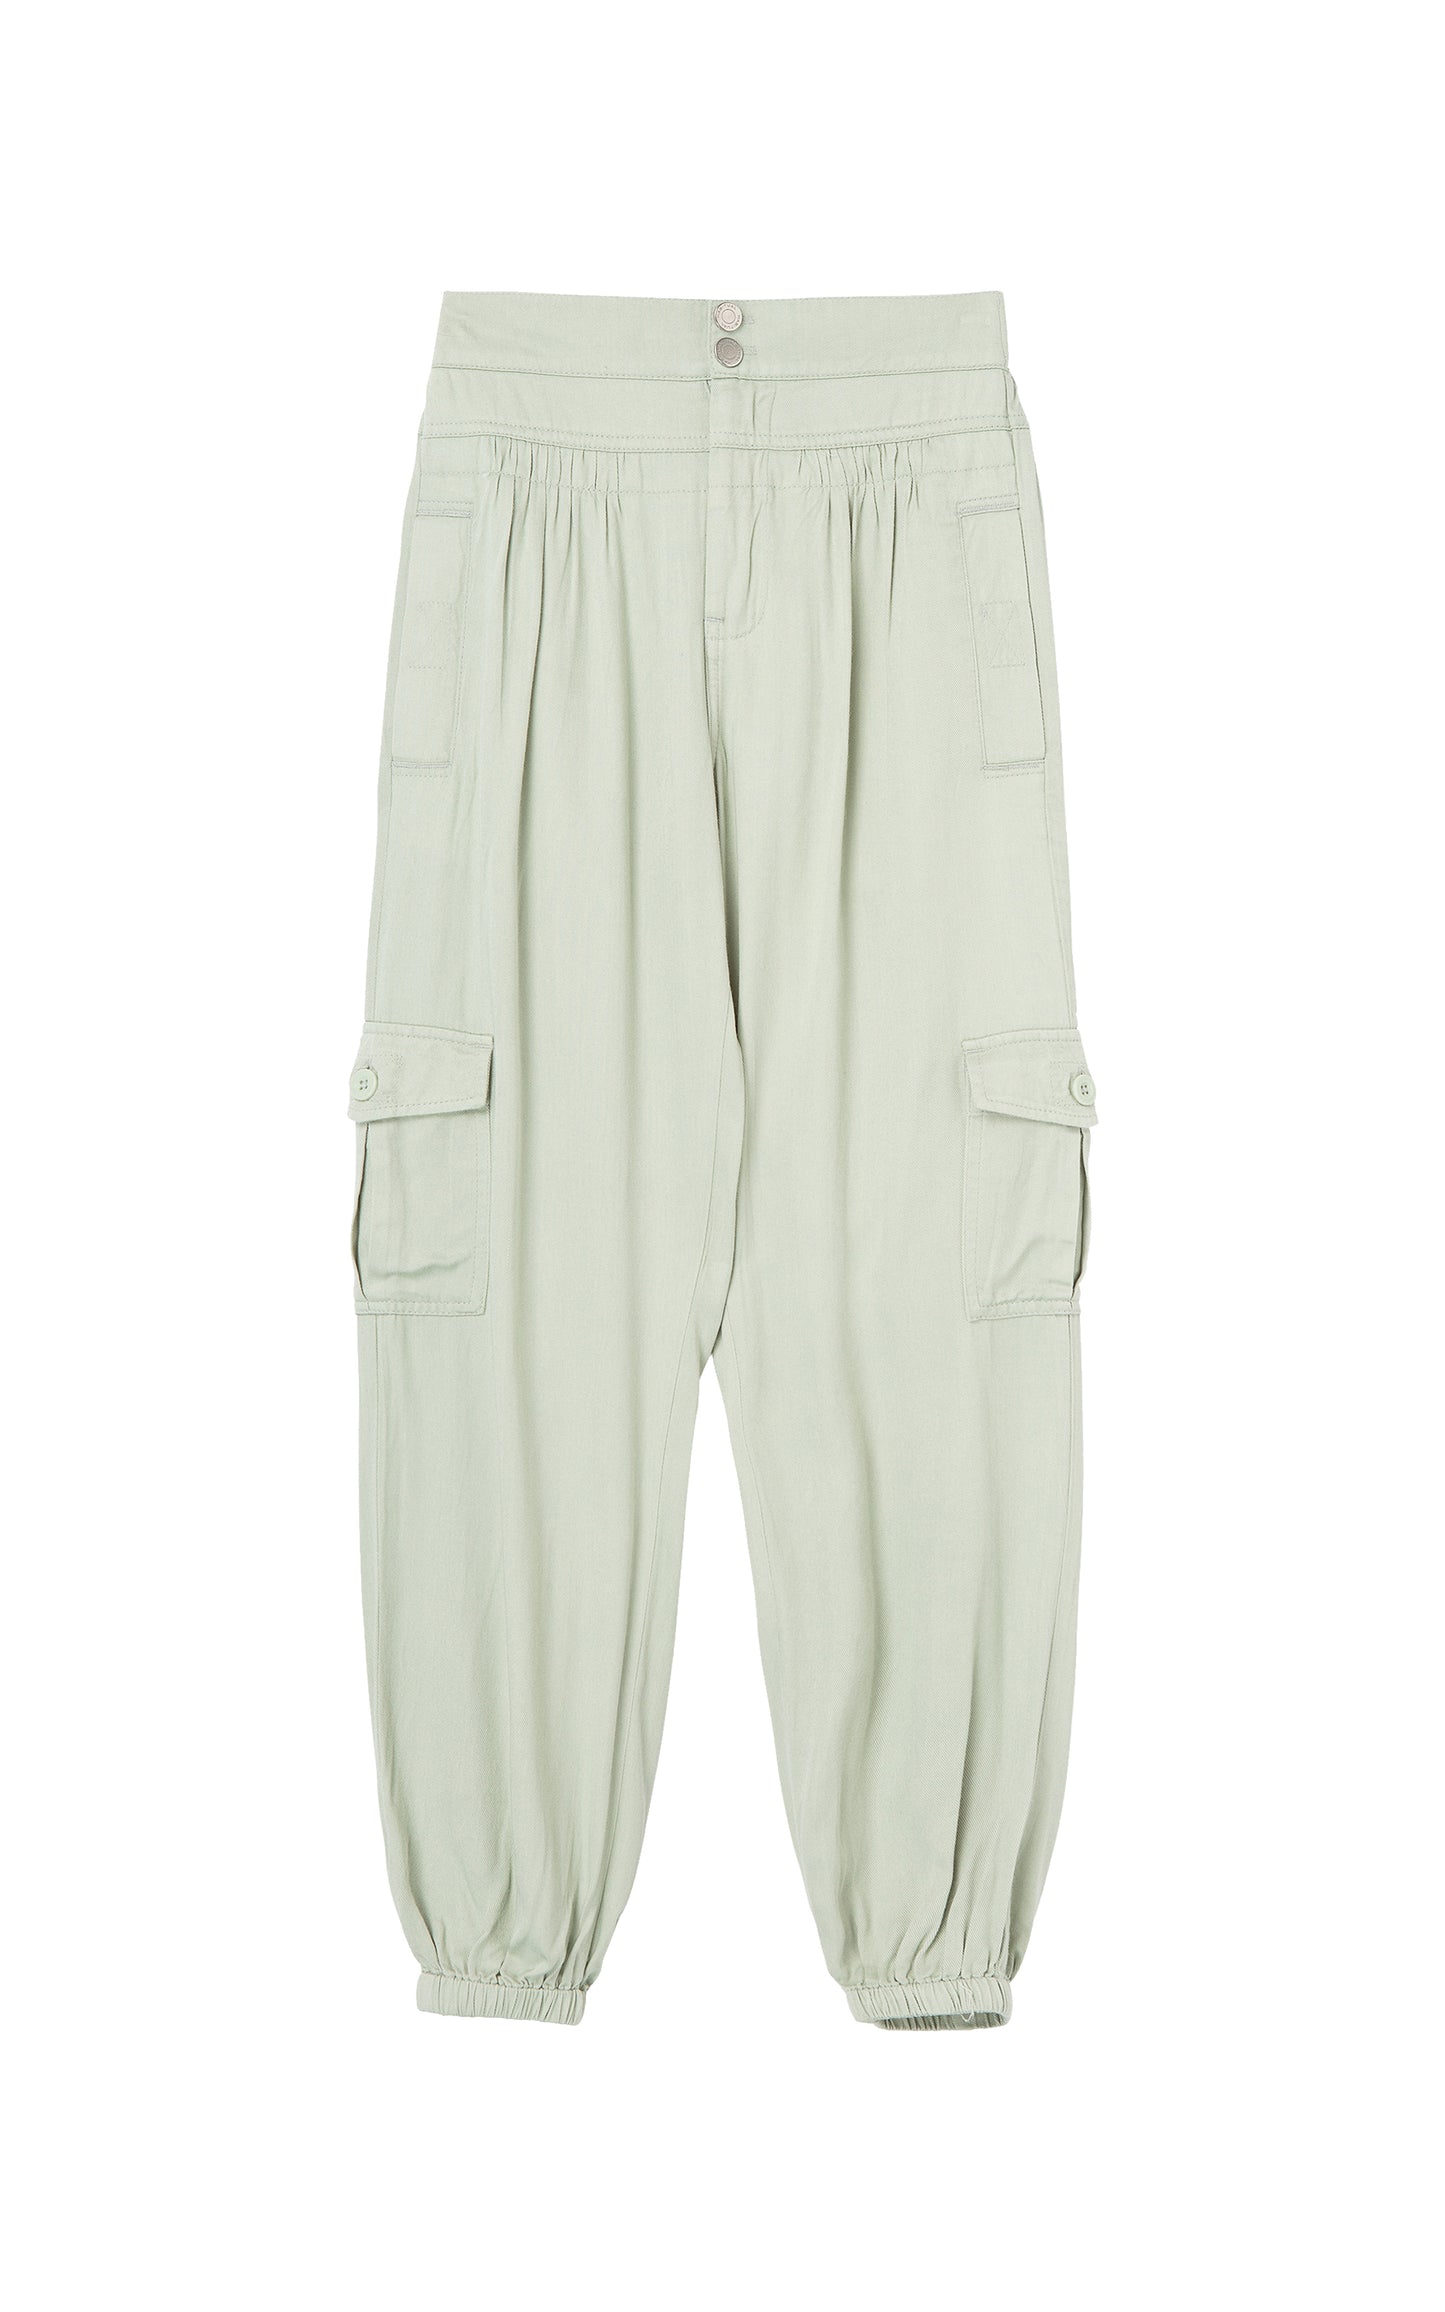 Light green pants with cargo pockets, pleat accents, and elastic ankle cuffs. 